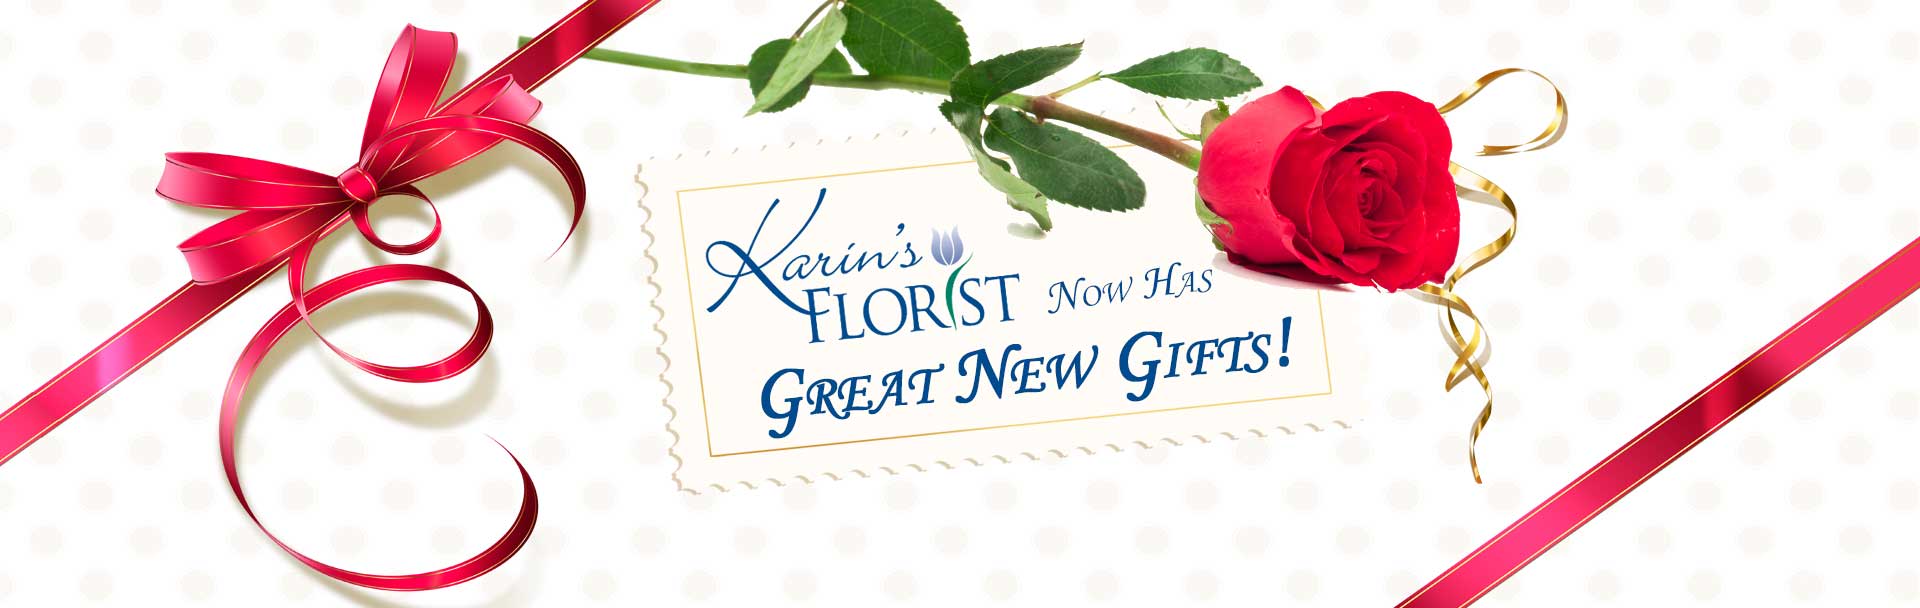 Unique Gifts at Karin's Florist